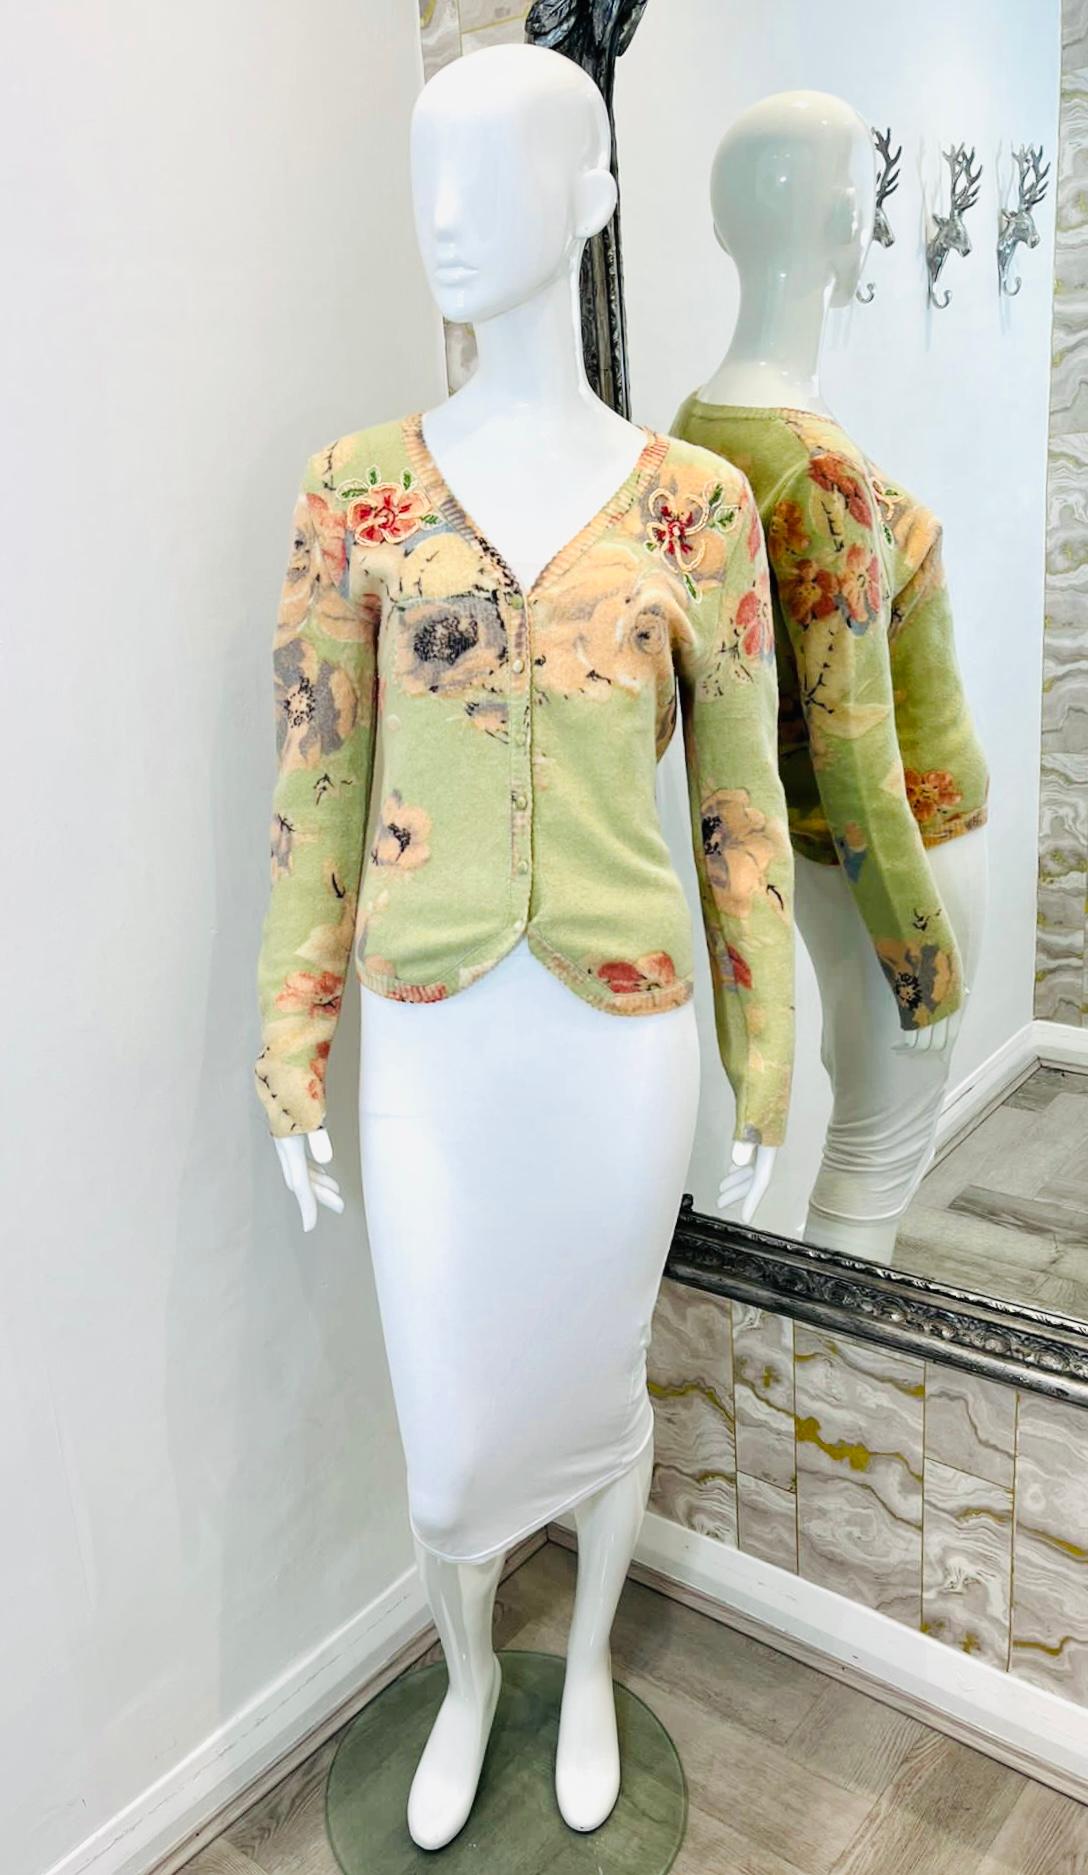 Blumarine Floral Embroidered Wool & Angora Cardigan

Pistachio green knitwear detailed with pastel floral designs and decorative bead embroidery to the sides.

Featuring V-Neckline and velvet button closure along the centre.

Size – S (Label missing